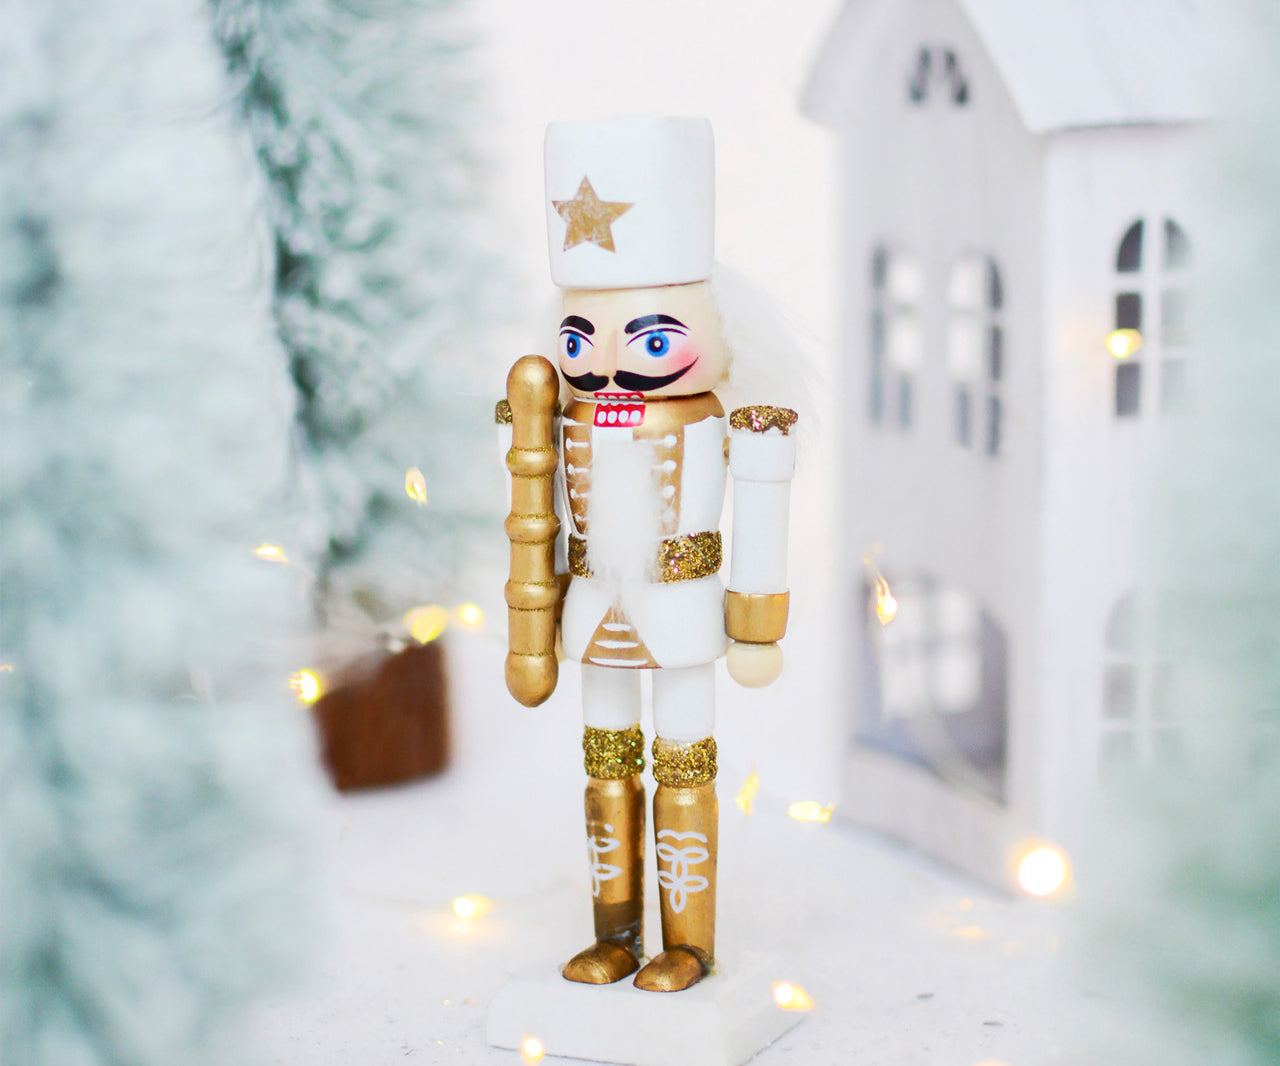 Tales from the Ballet: The Nutcracker